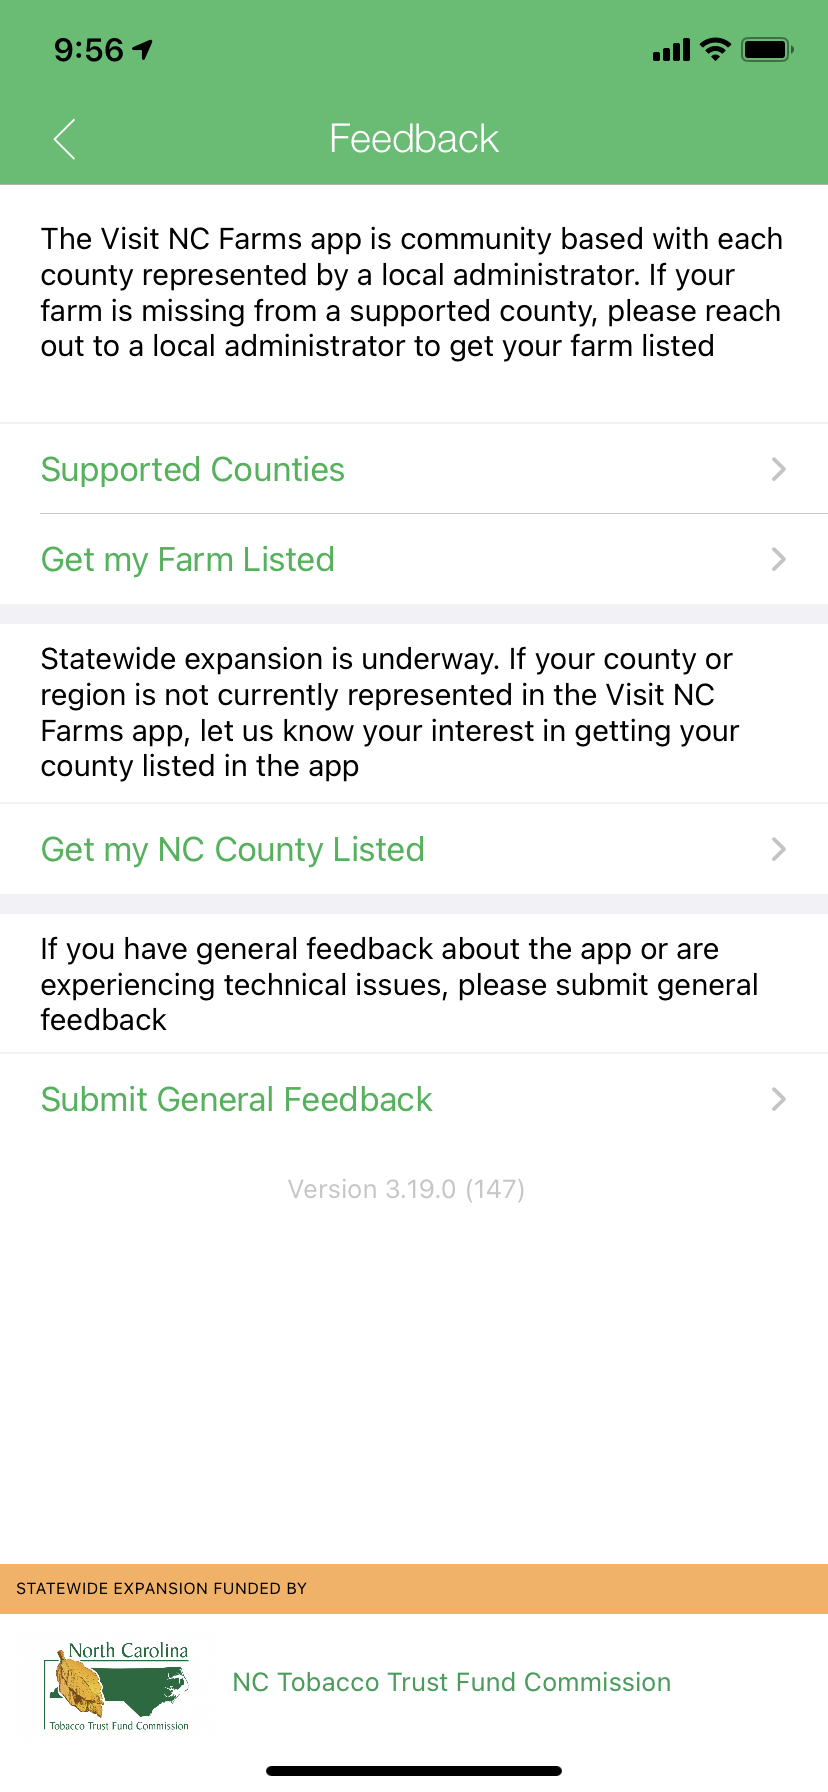 Feedback page of the Visit NC Farms app